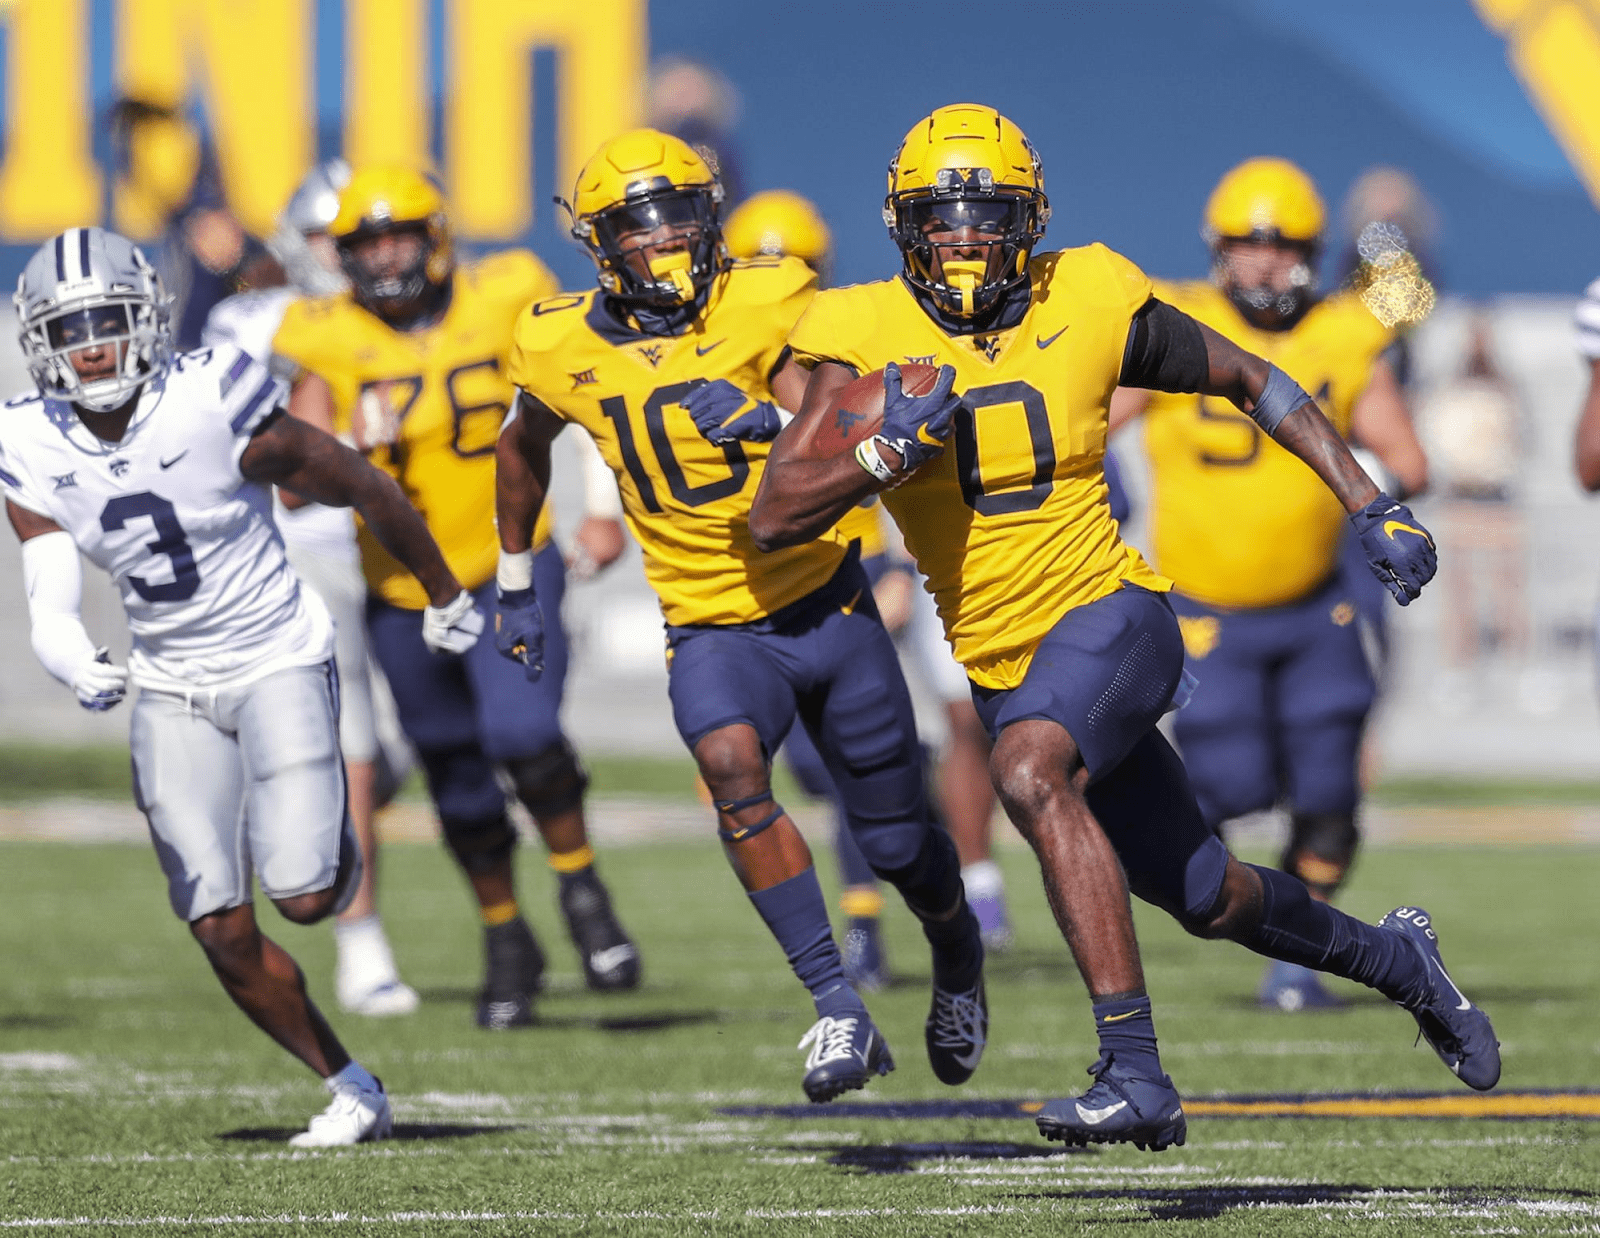 Bryce Ford-Wheaton is a solid WR for West Virginia. He utilizes his size very well and showcases great hands. Hula Bowl scout Mike Bey breaks down the Mountaineer WR as an NFL Prospect in this report.